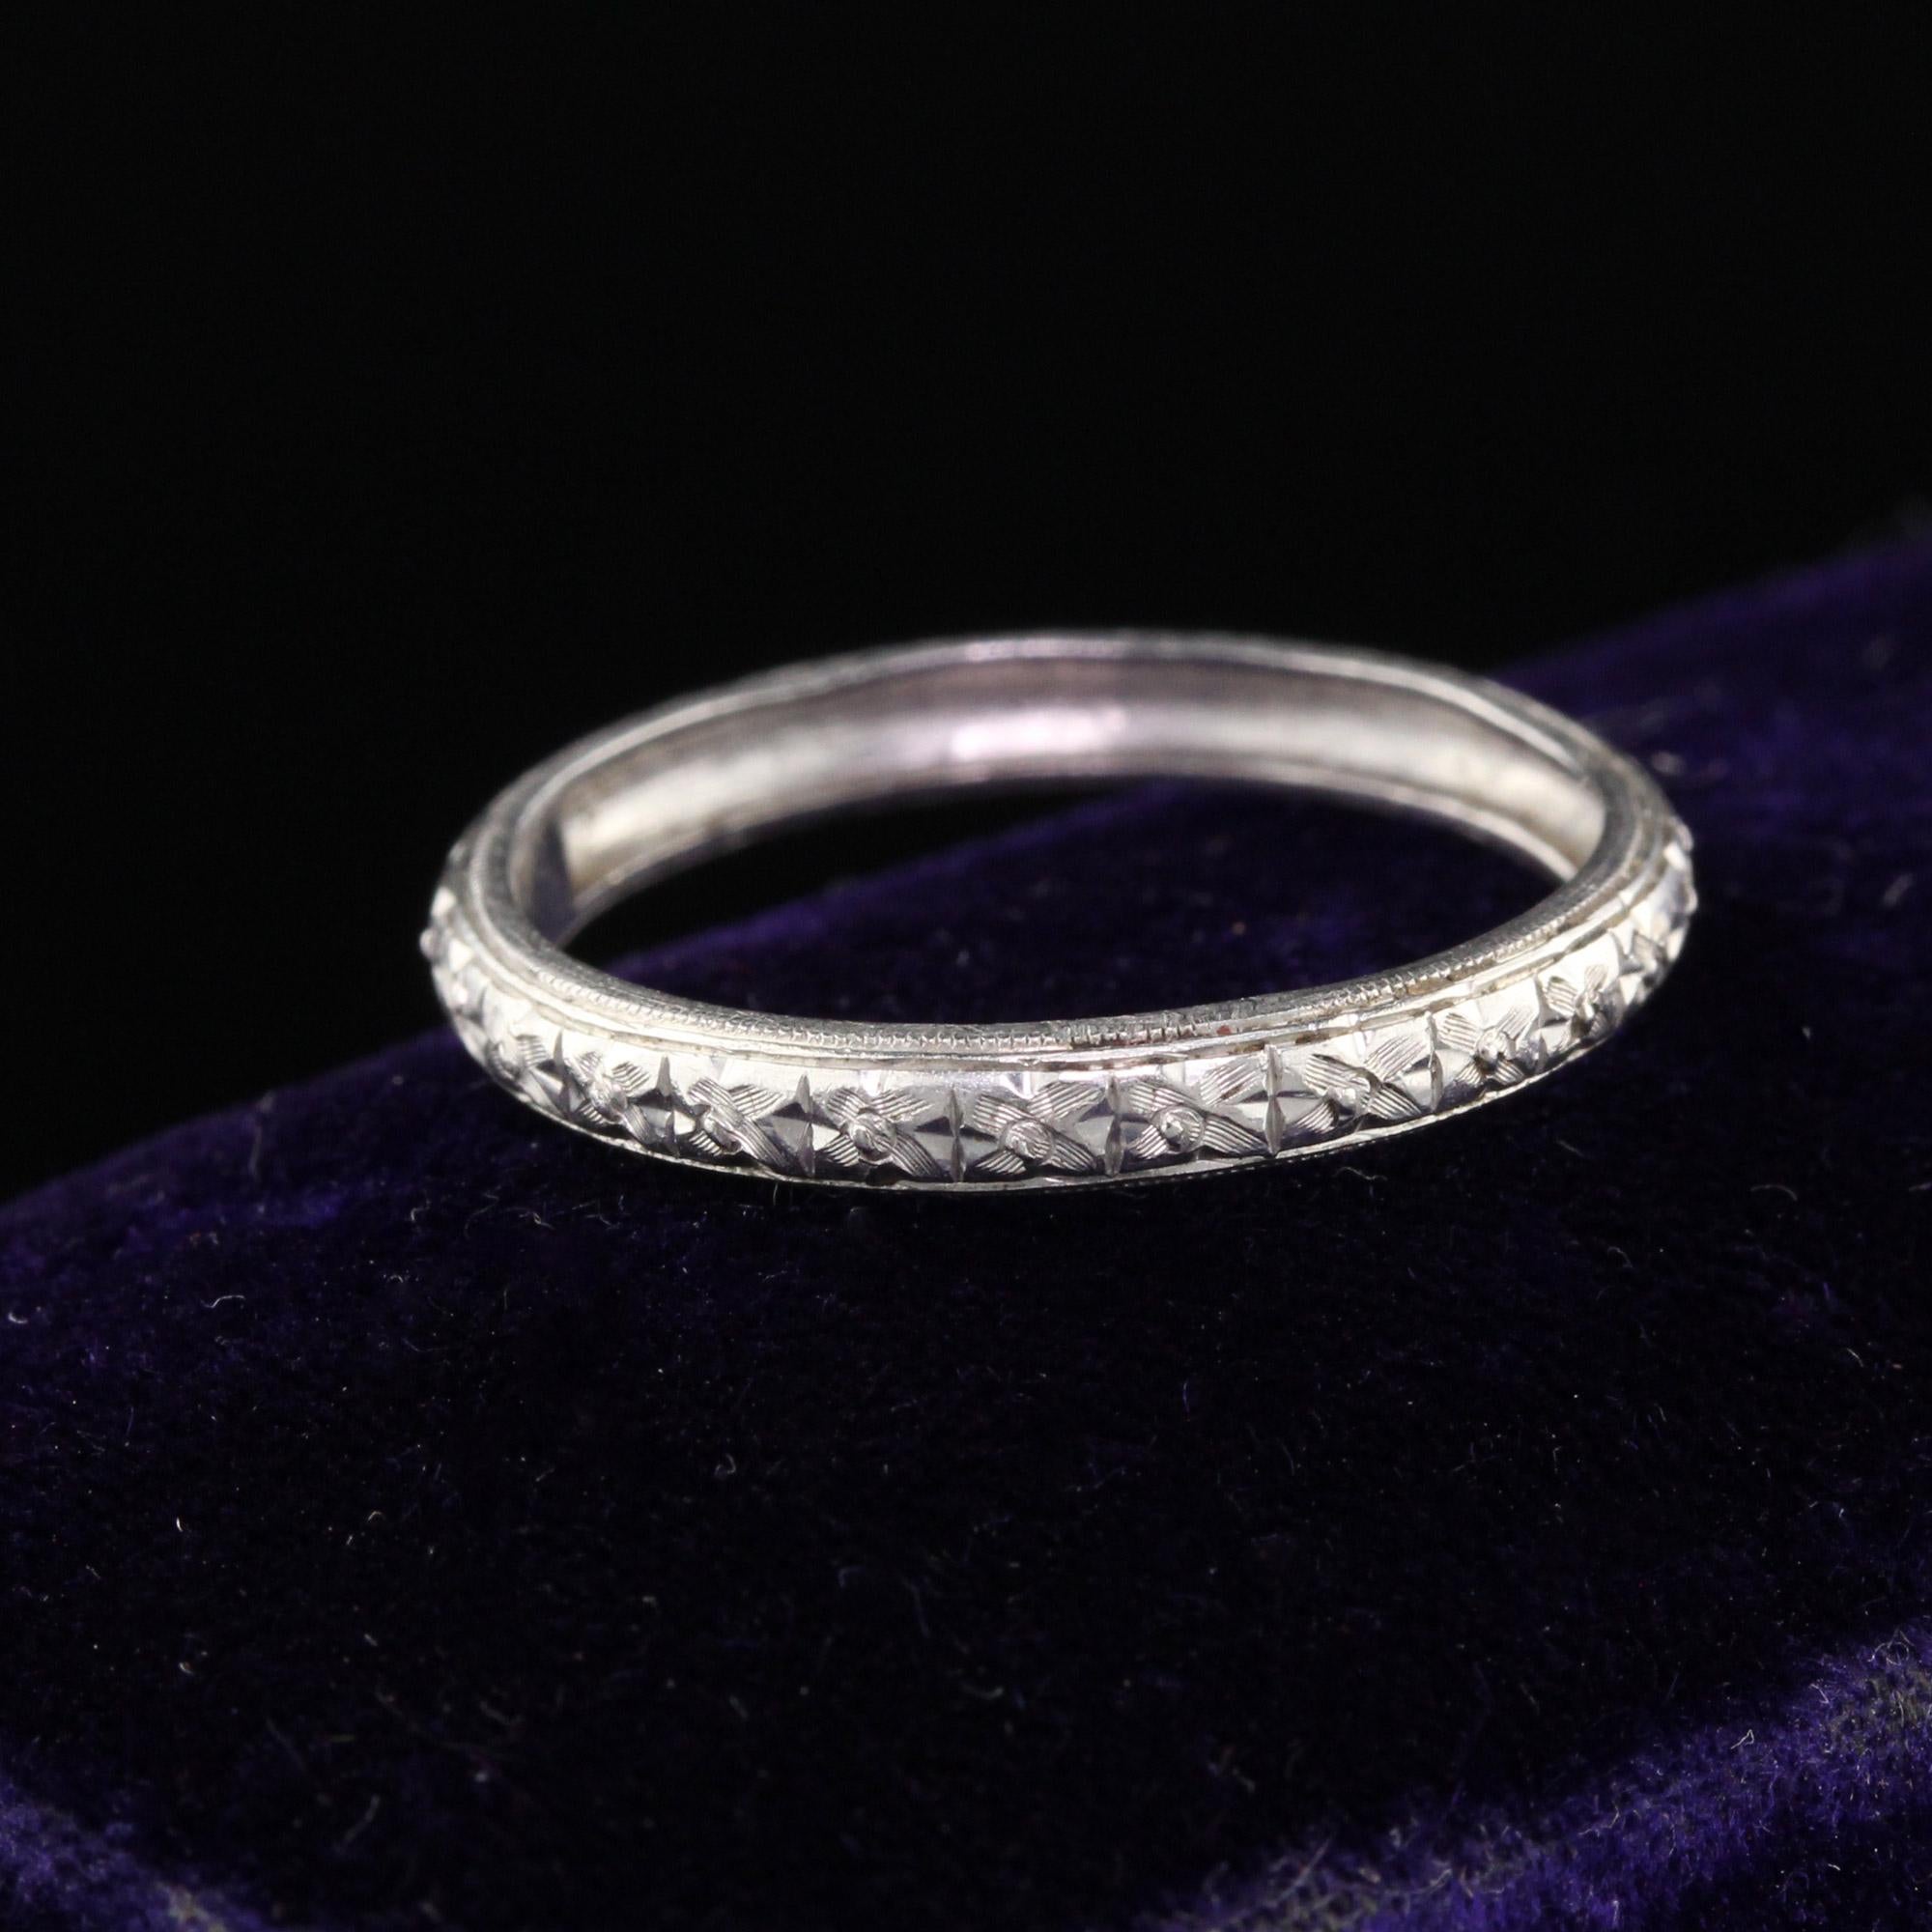 Art deco platinum wedding band in excellent condition with flower engravings all the way around.

#R0307

Metal: Platinum

Weight: 1.7 Grams

Ring Size: 5 3/4

*Unfortunately this ring cannot be sized.

Measurements: 2.58 mm wide

Measurement from